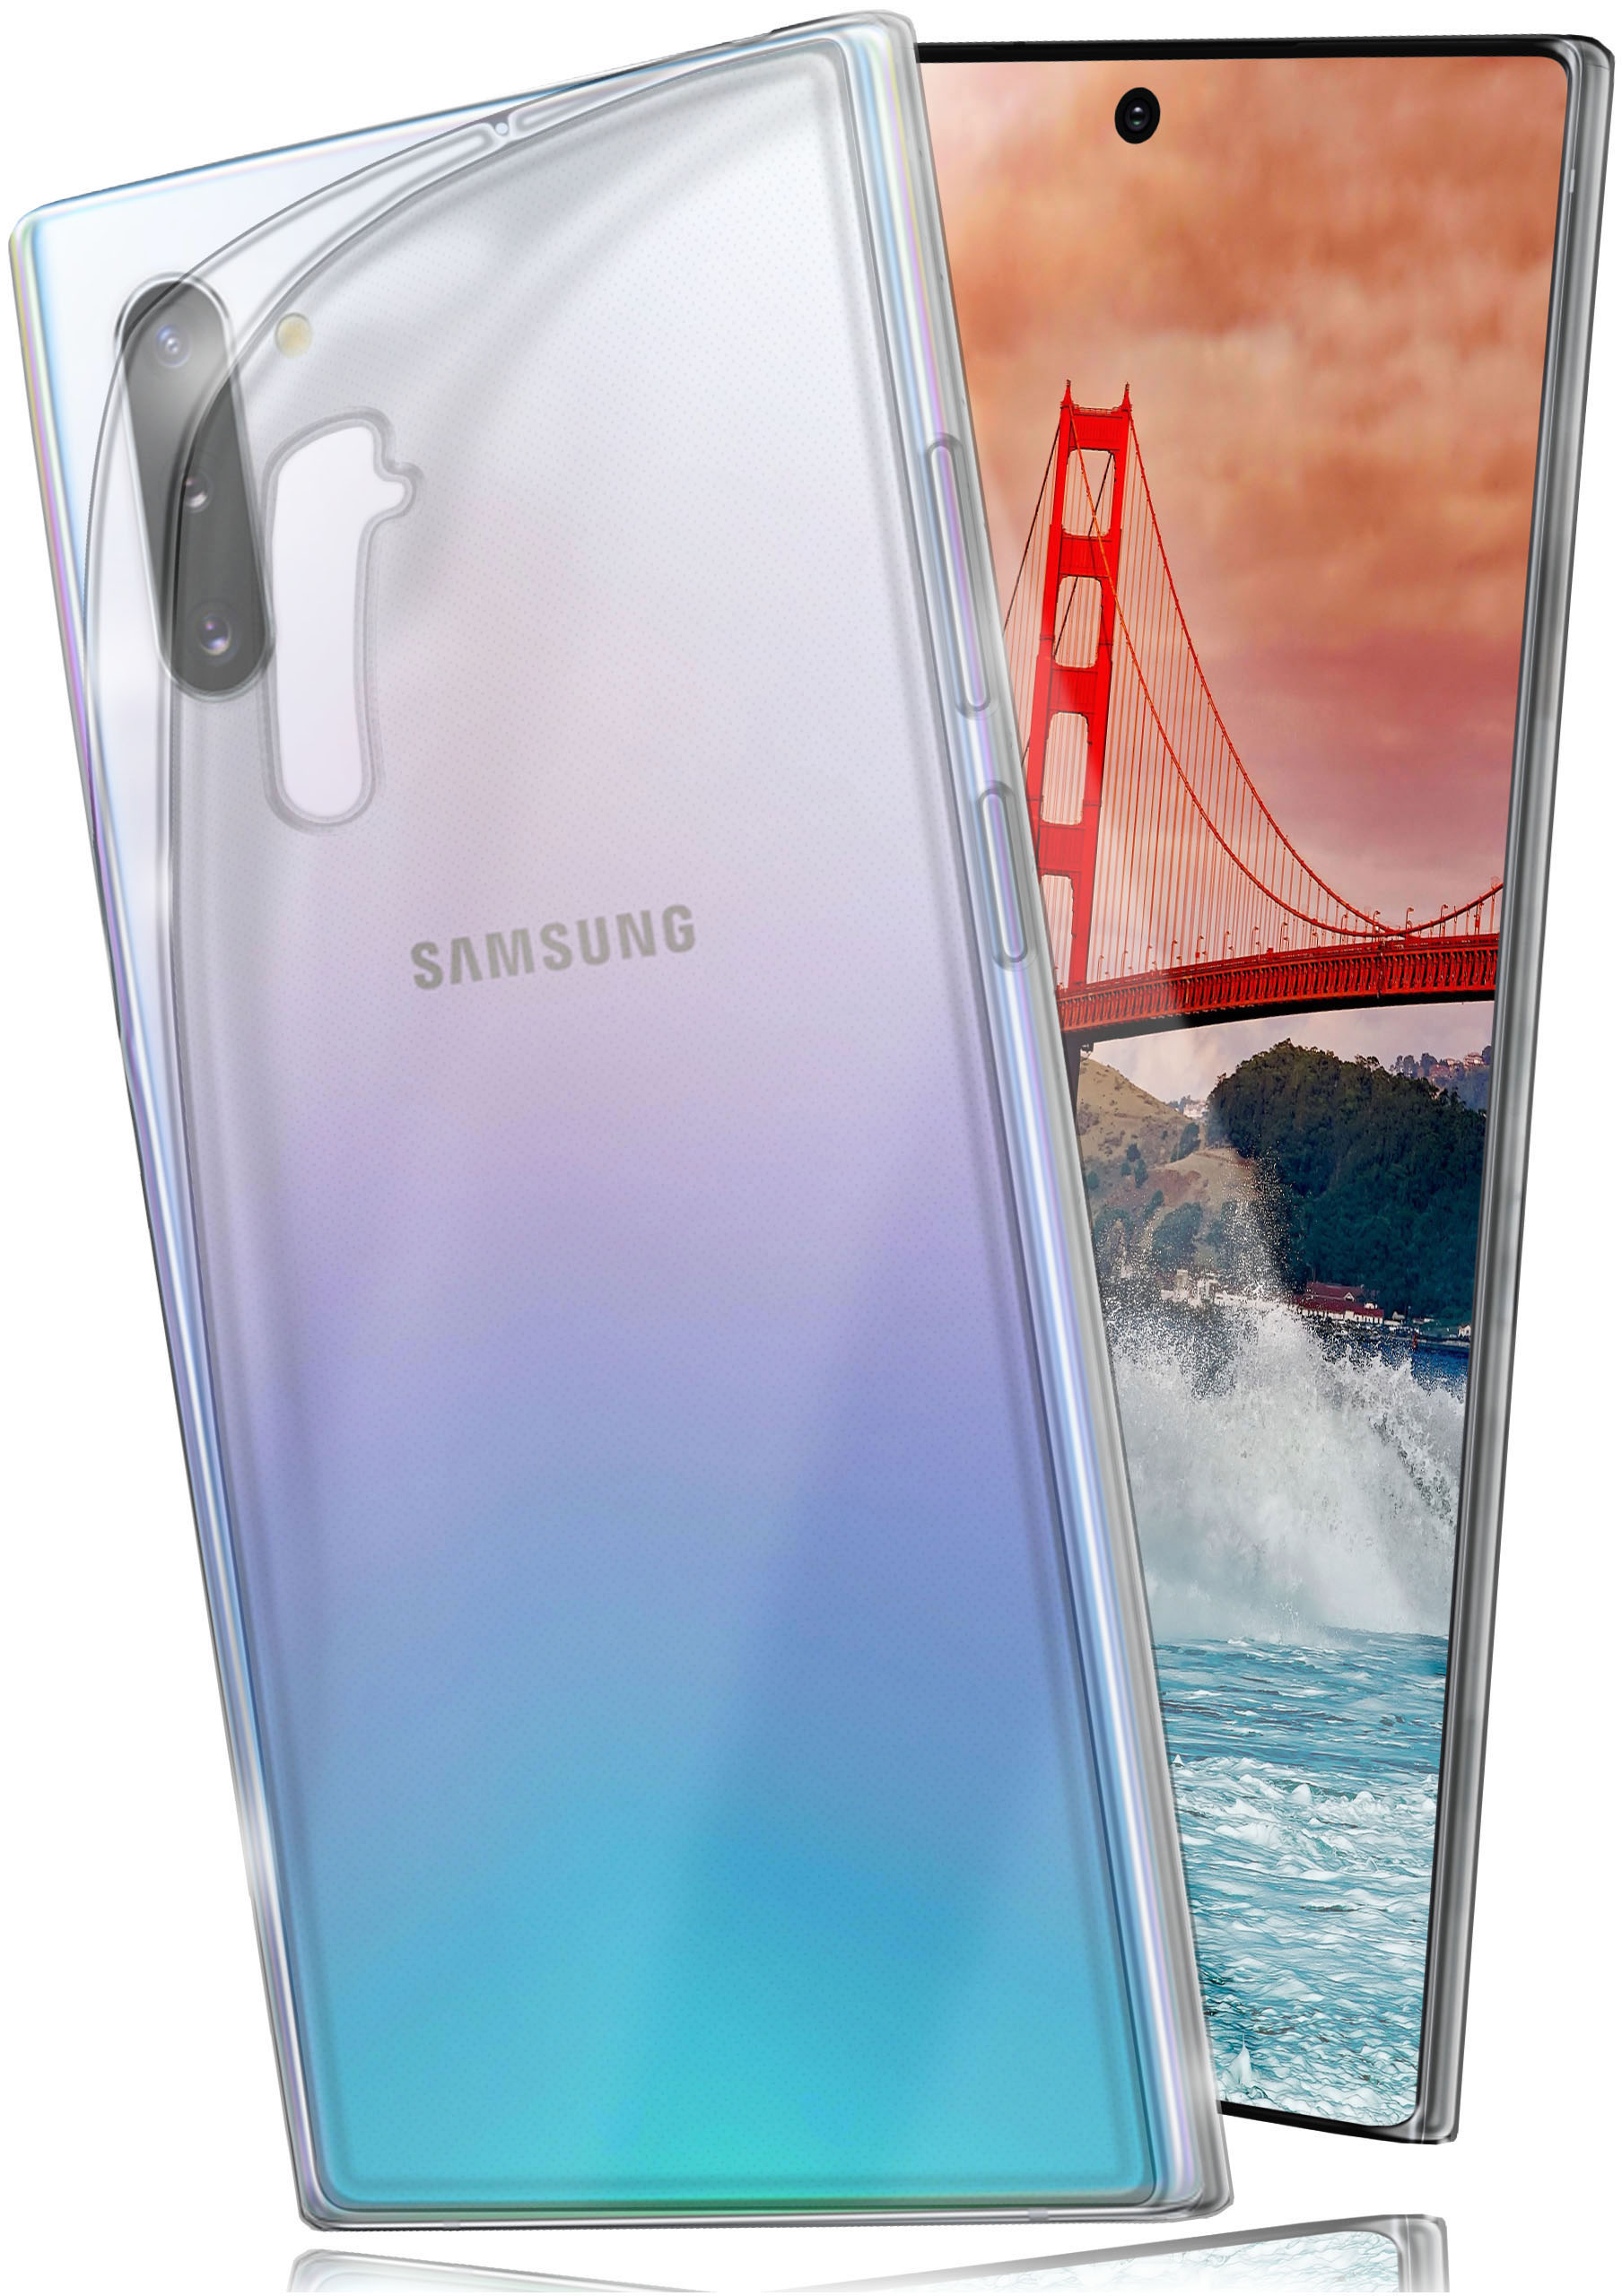 MOEX Aero Case, Crystal-Clear Backcover, Note Galaxy 10, Samsung